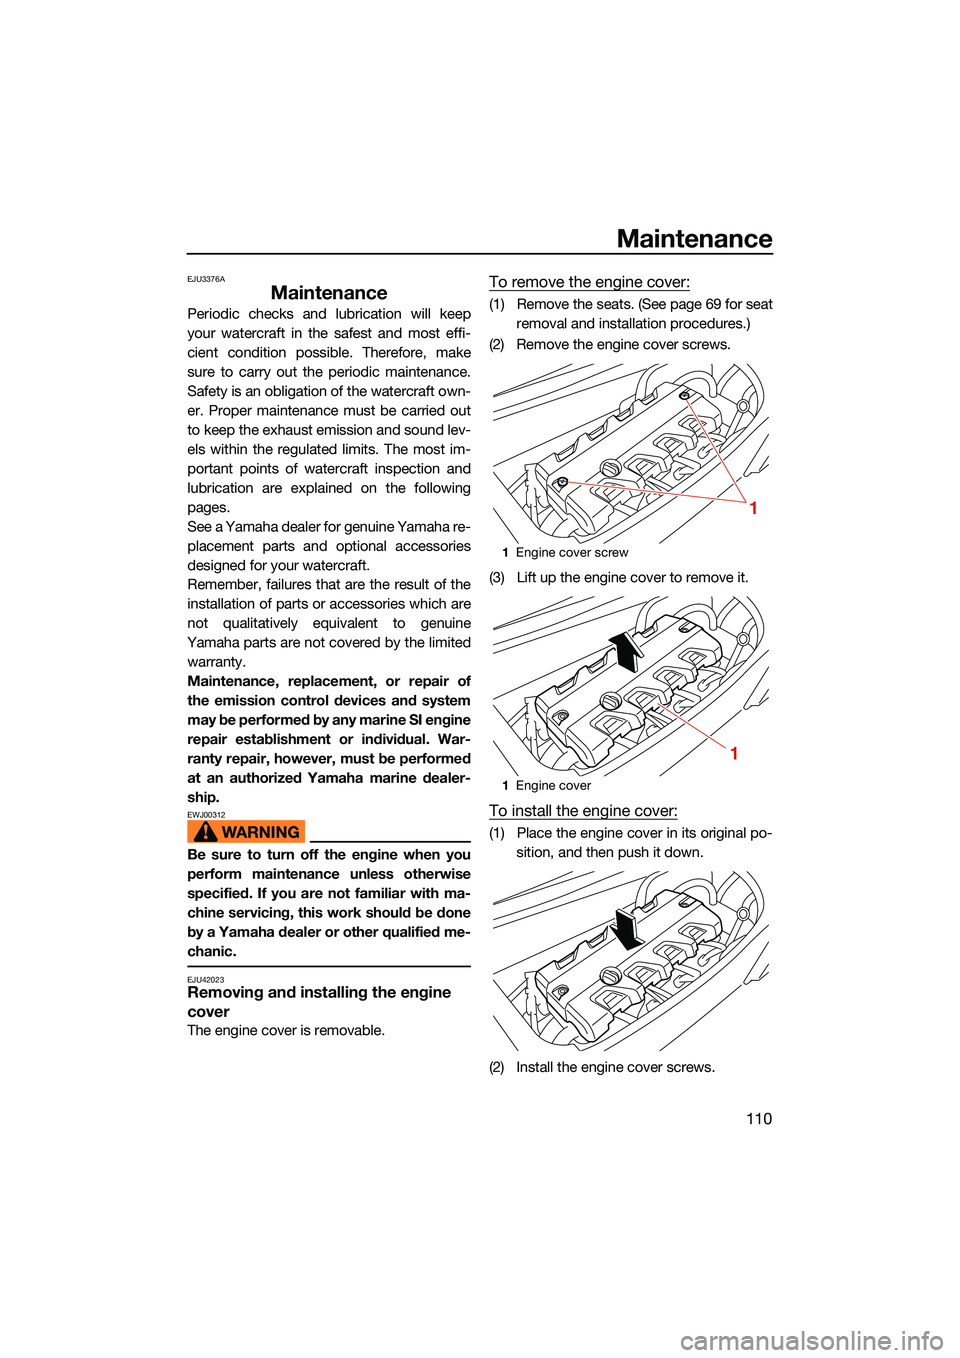 YAMAHA FX HO CRUISER 2022  Owners Manual Maintenance
110
EJU3376A
Maintenance
Periodic checks and lubrication will keep
your watercraft in the safest and most effi-
cient condition possible. Therefore, make
sure to carry out the periodic mai